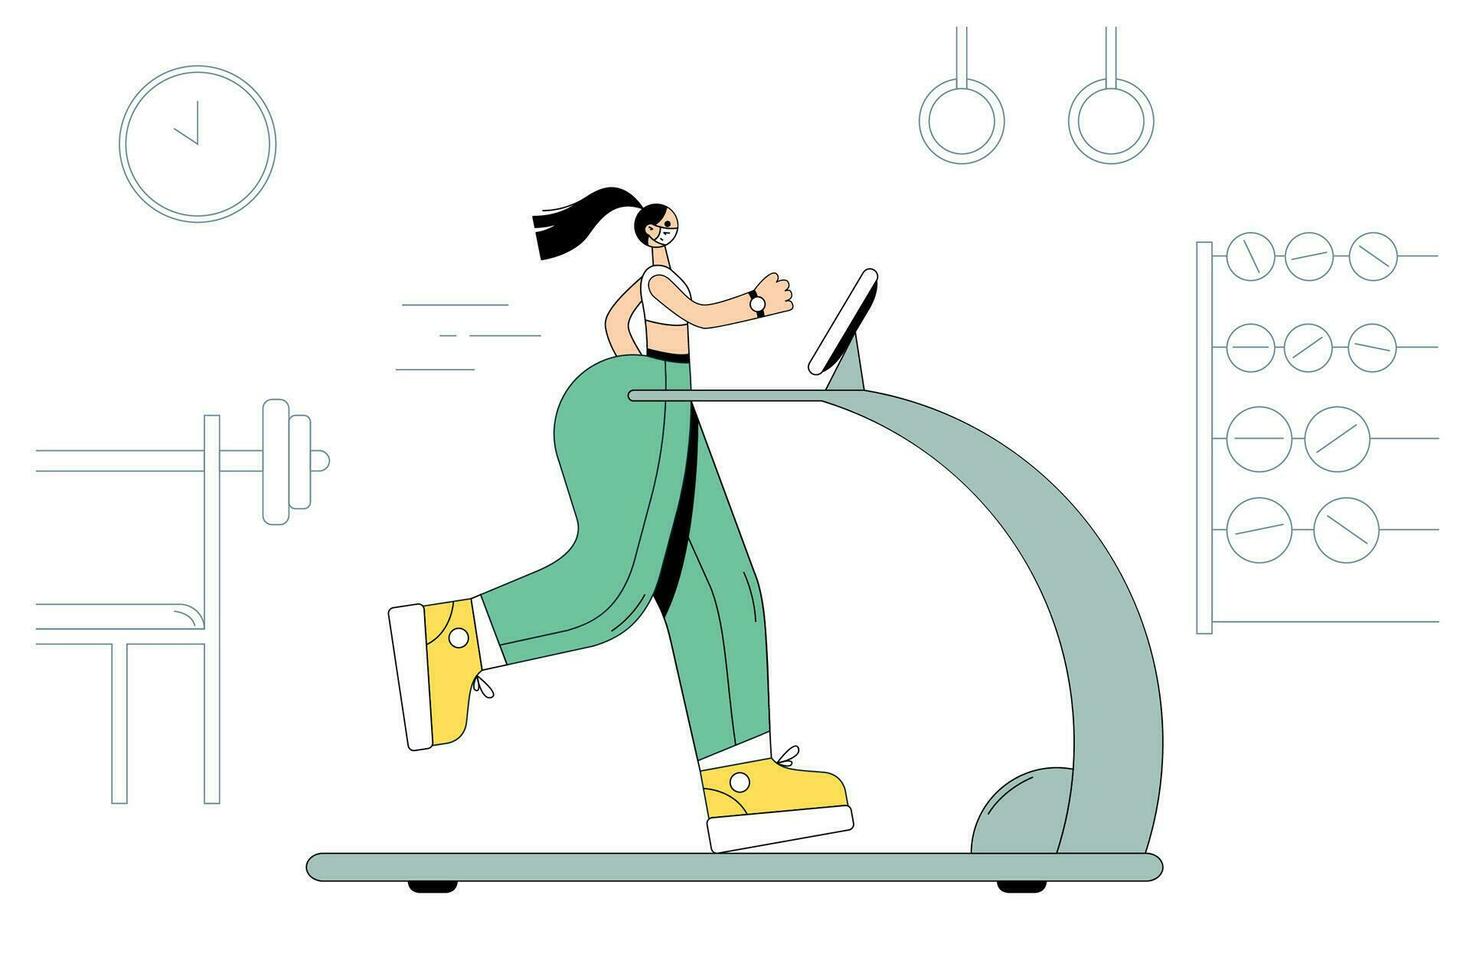 Trainings and sport during COVID-19 pandemic concept. Sportswoman in medical face mask training on treadmill in gym during coronavirus outbreak vector illustration